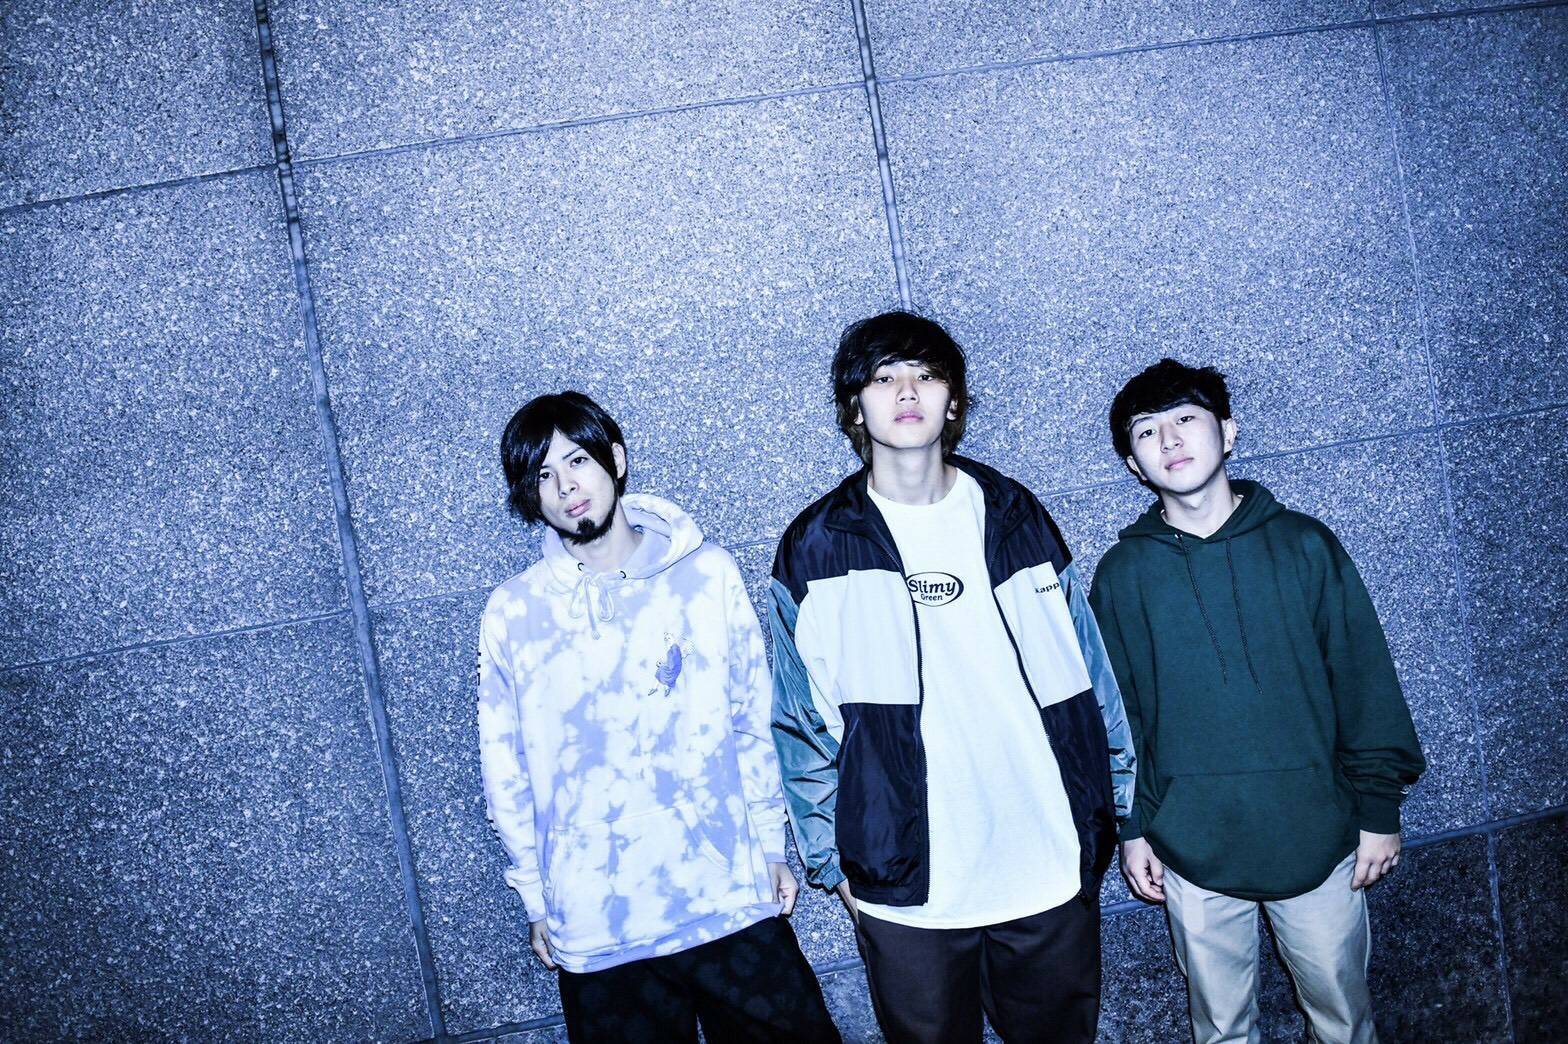 amplest×栄R.A.D pre.『青天の霹靂』-amplest 2nd DEMO "Lightning Vortex" Release Event-